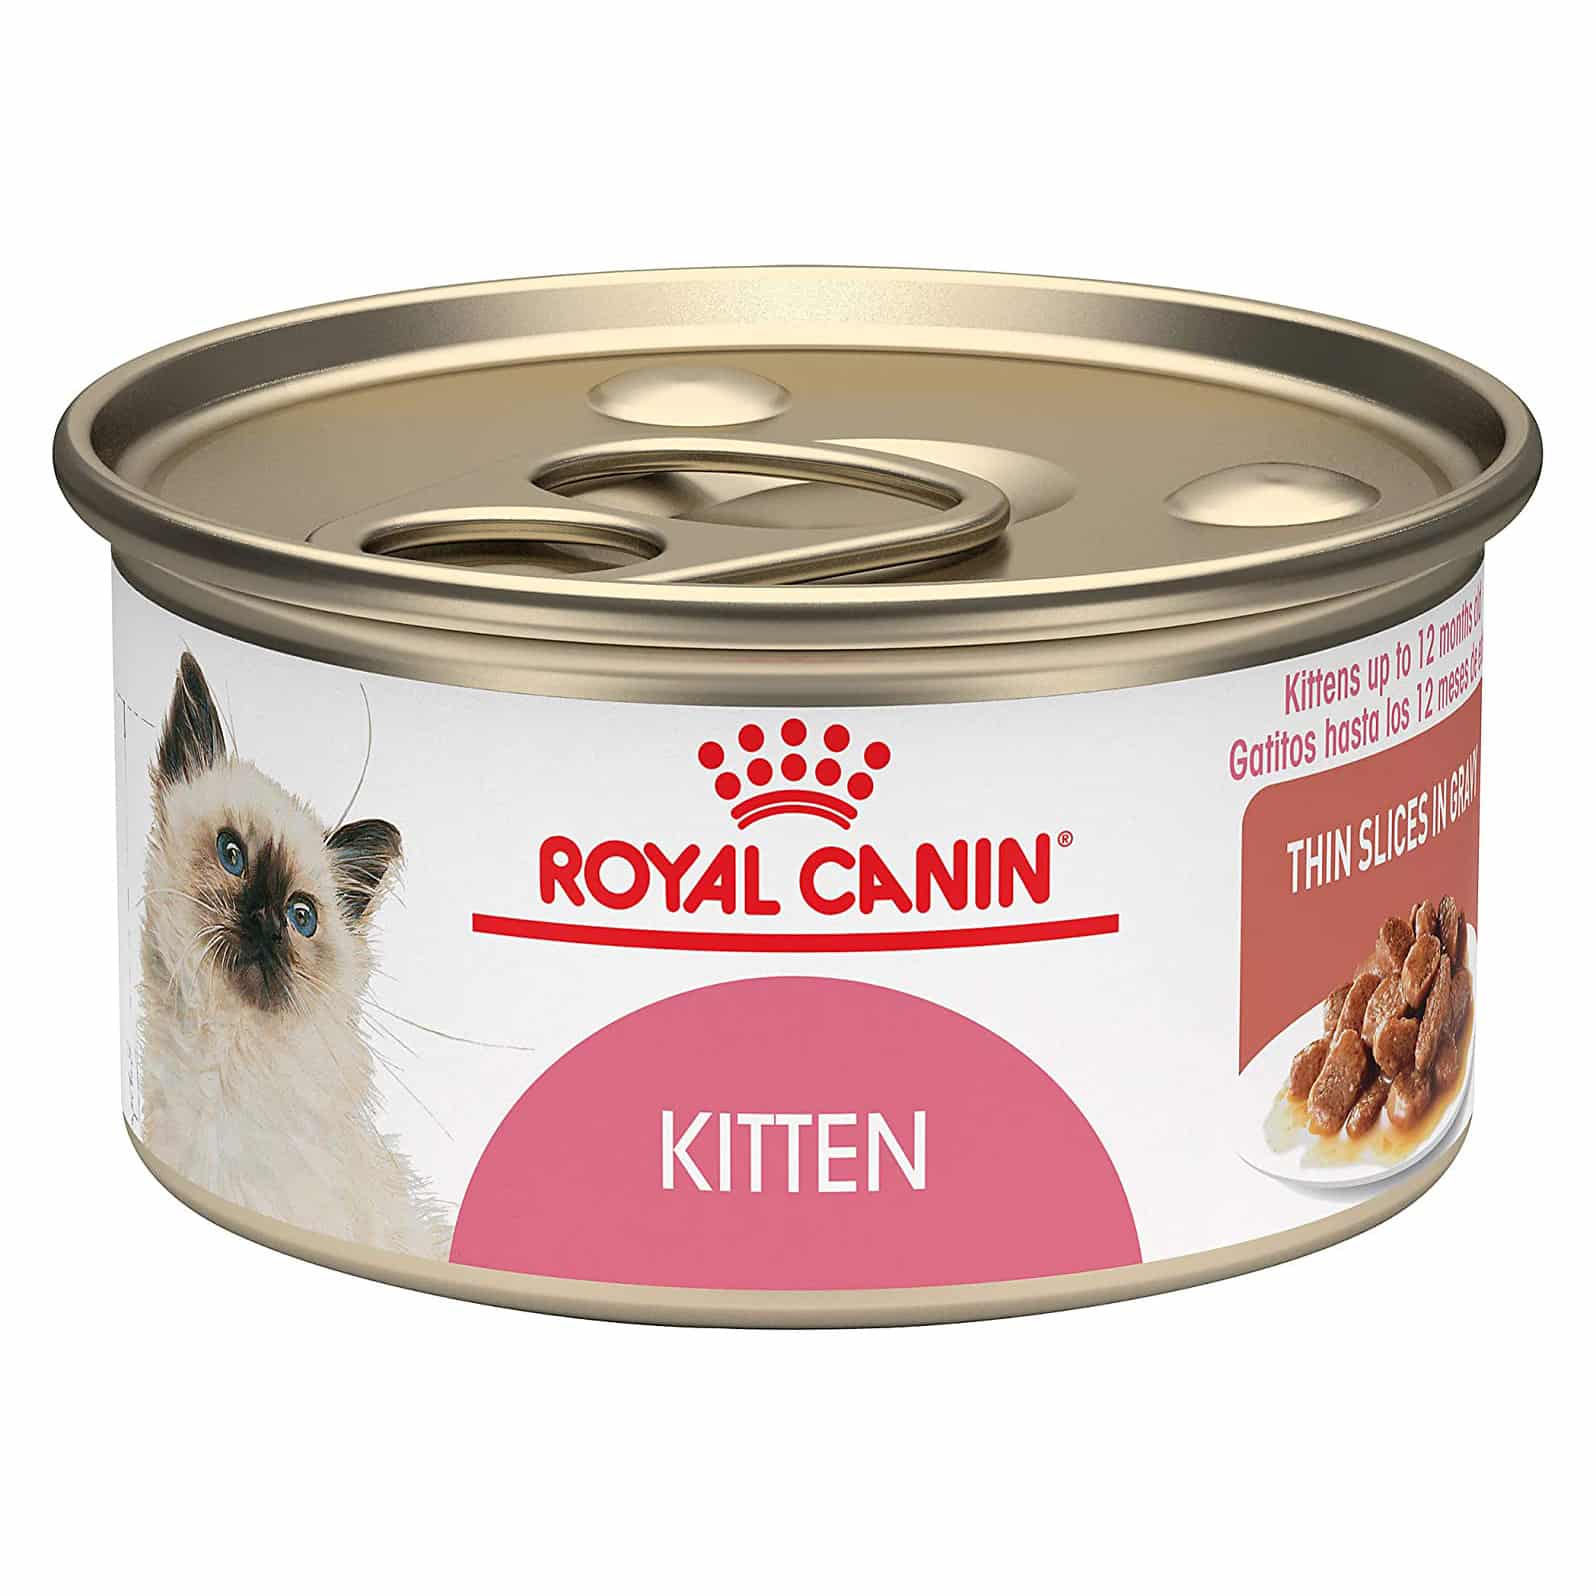 Royal Canin Kitten Thin Slices in Gravy, Canned Cat Food, 3 oz